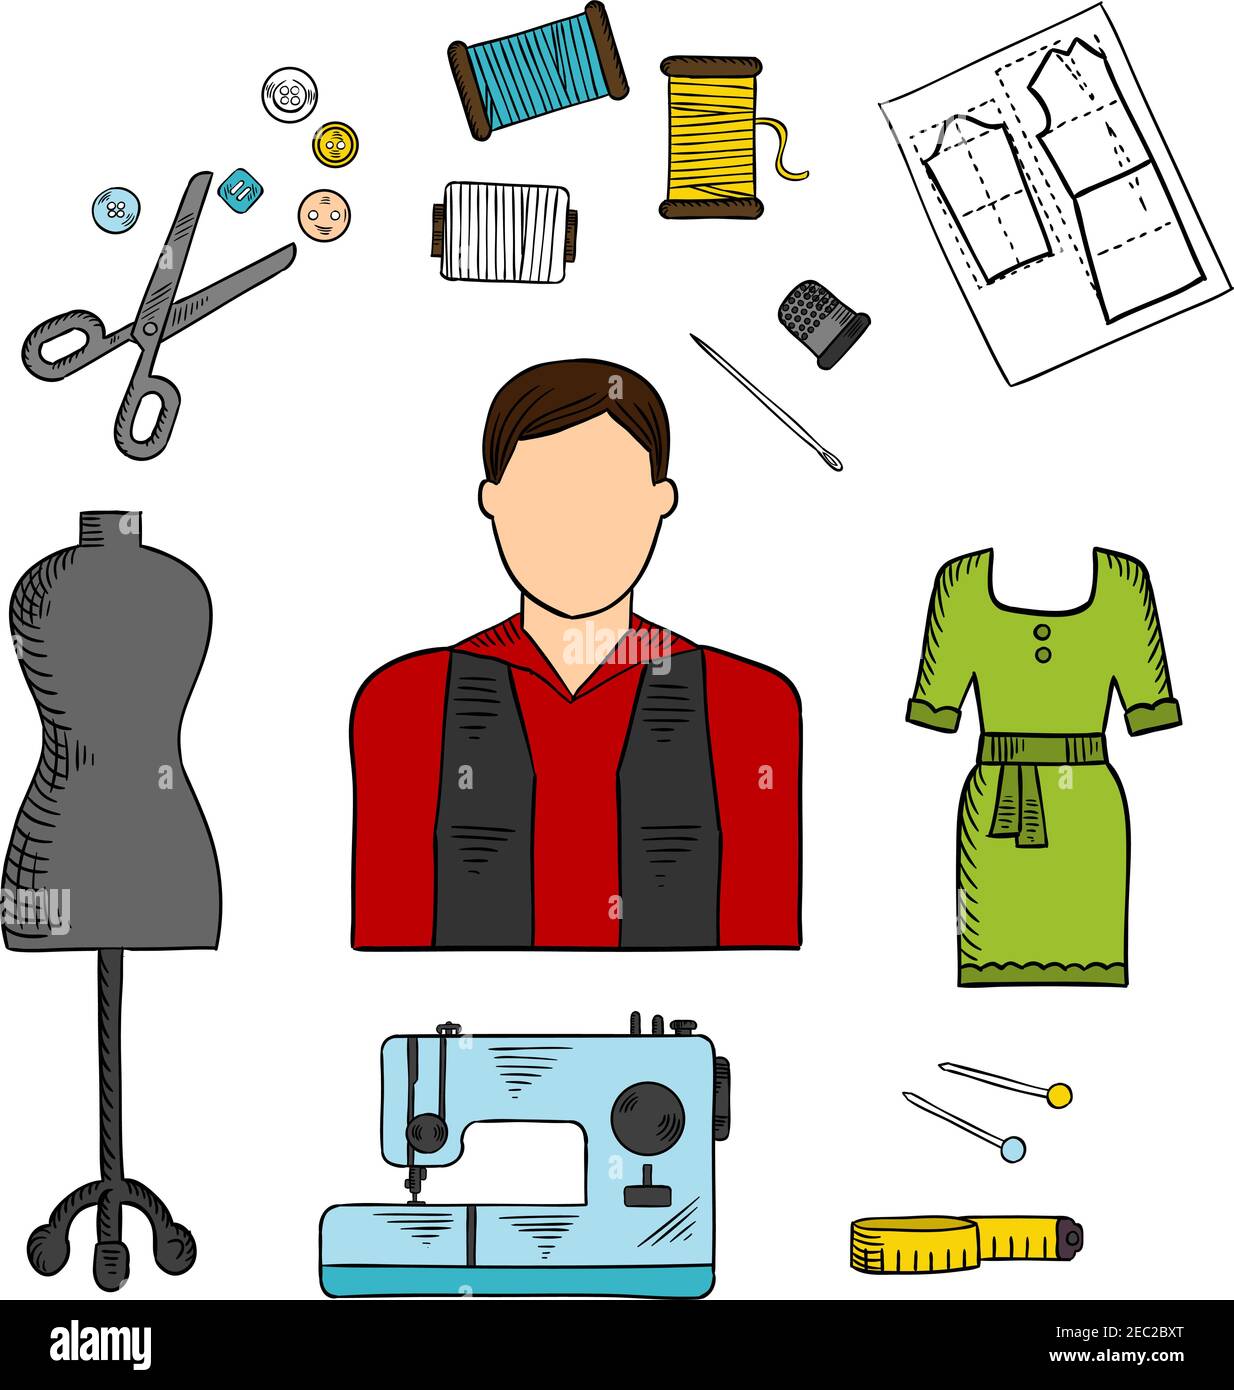 Fashion designer with sewing tools symbol for professions of service  industry design with scissors, needles and pins, threads, sewing machine,  mannequ Stock Vector Image & Art - Alamy